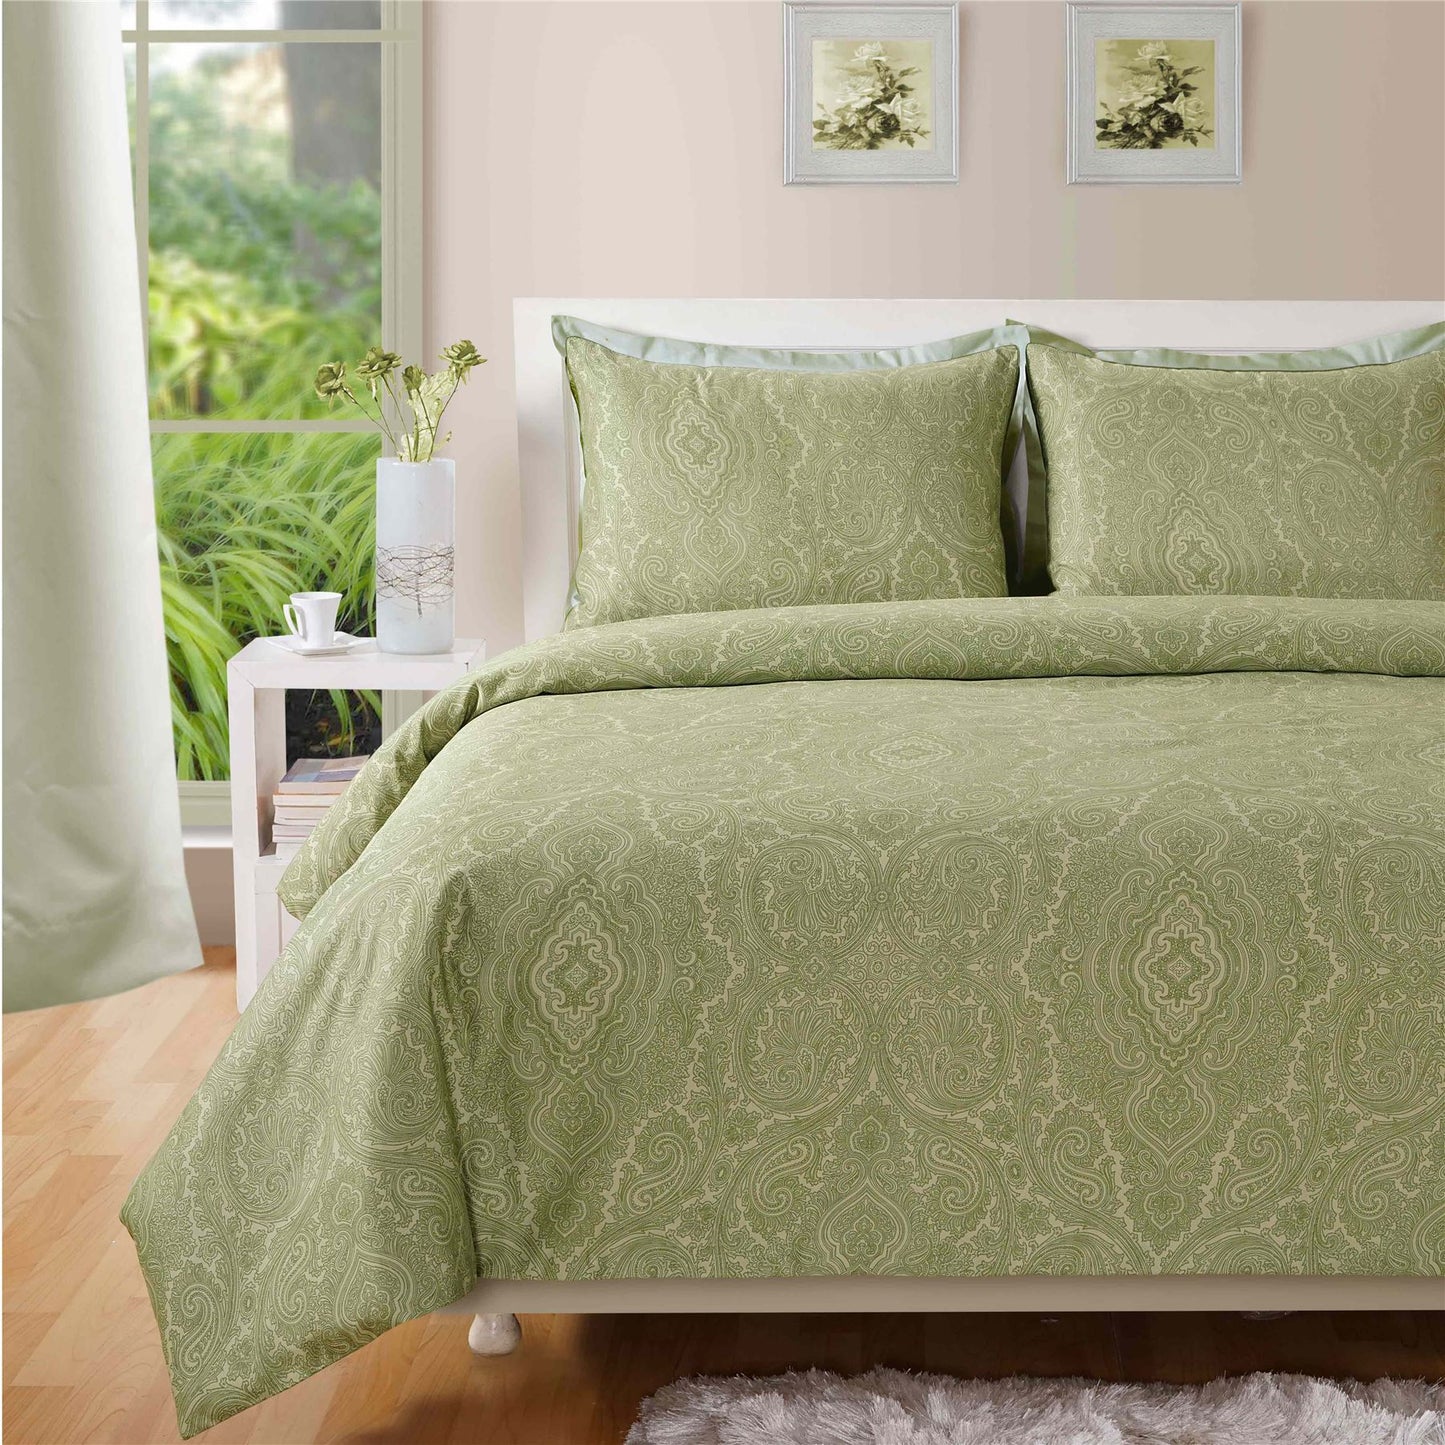 Luxurious Paisley Print Duvet Cover Set with Cotton Rich Fabric